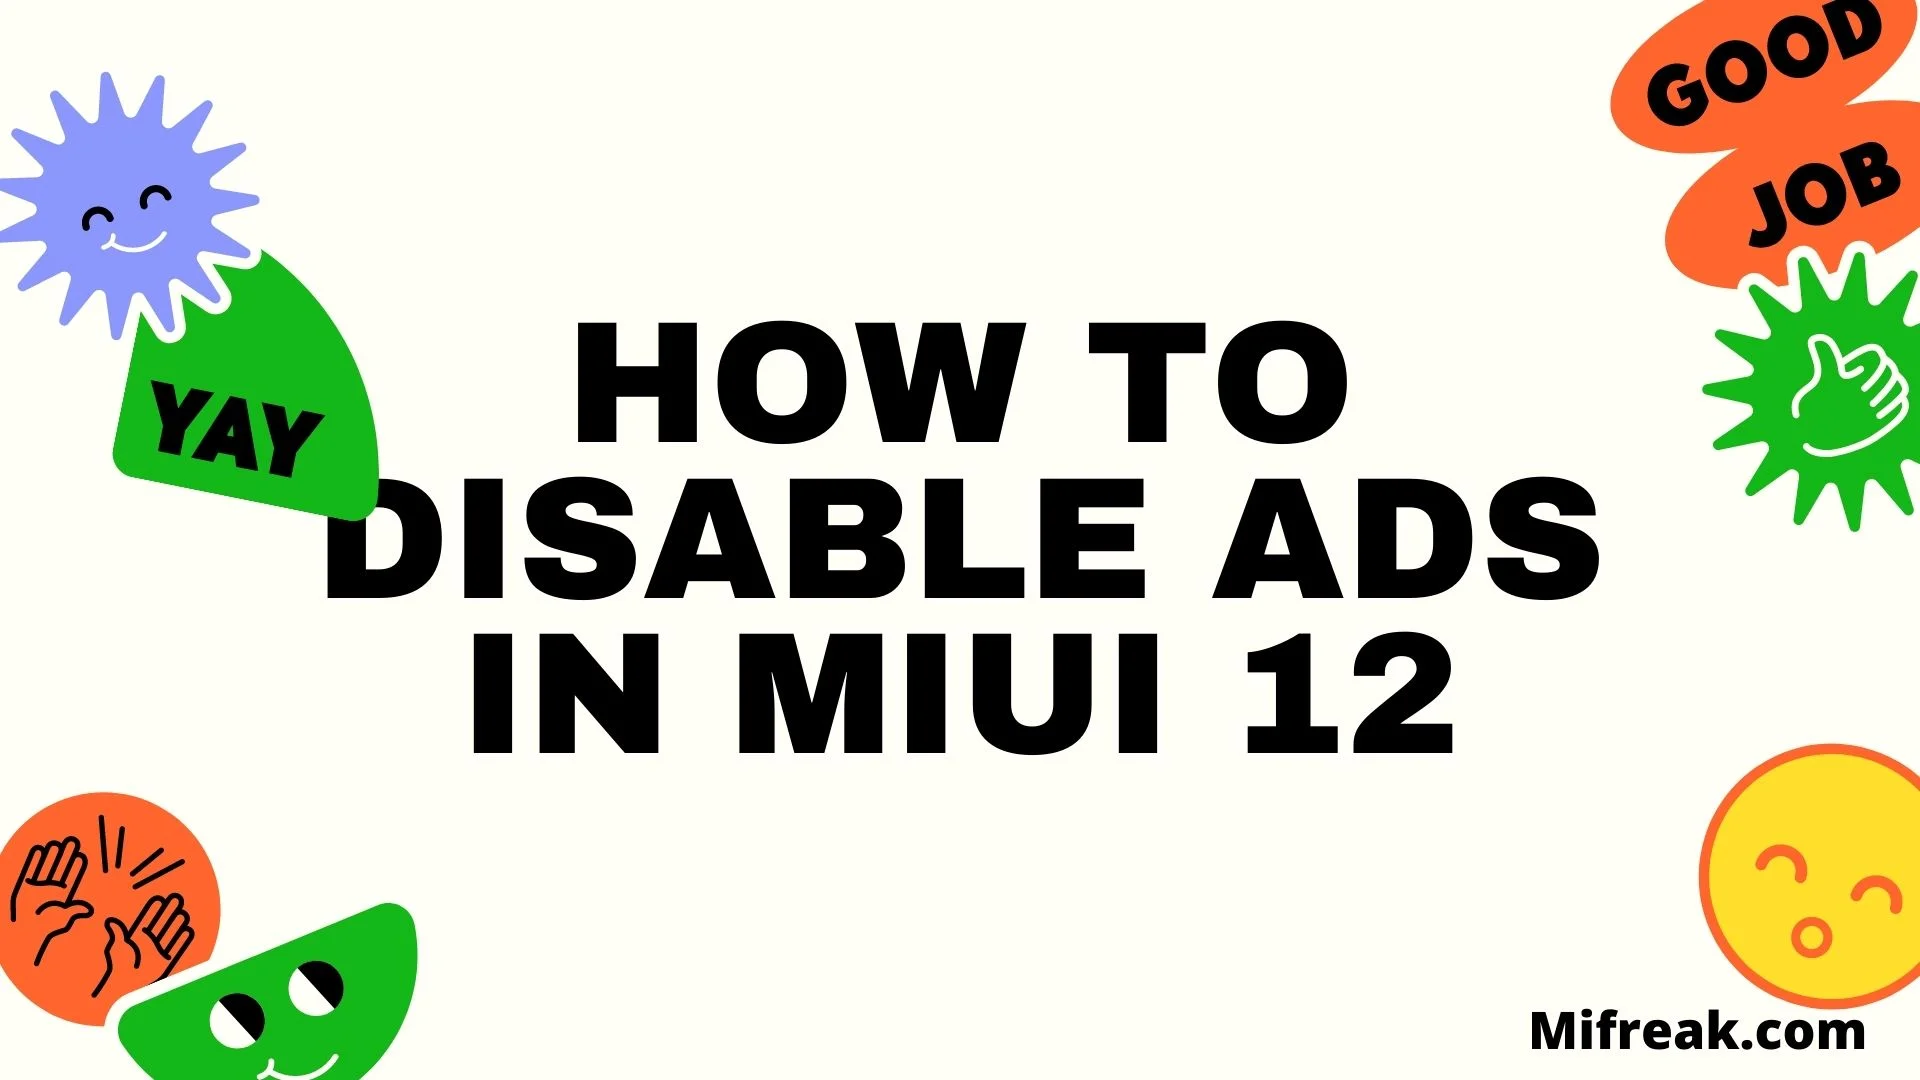 Xiaomi: How to Disable ads in MIUI 12